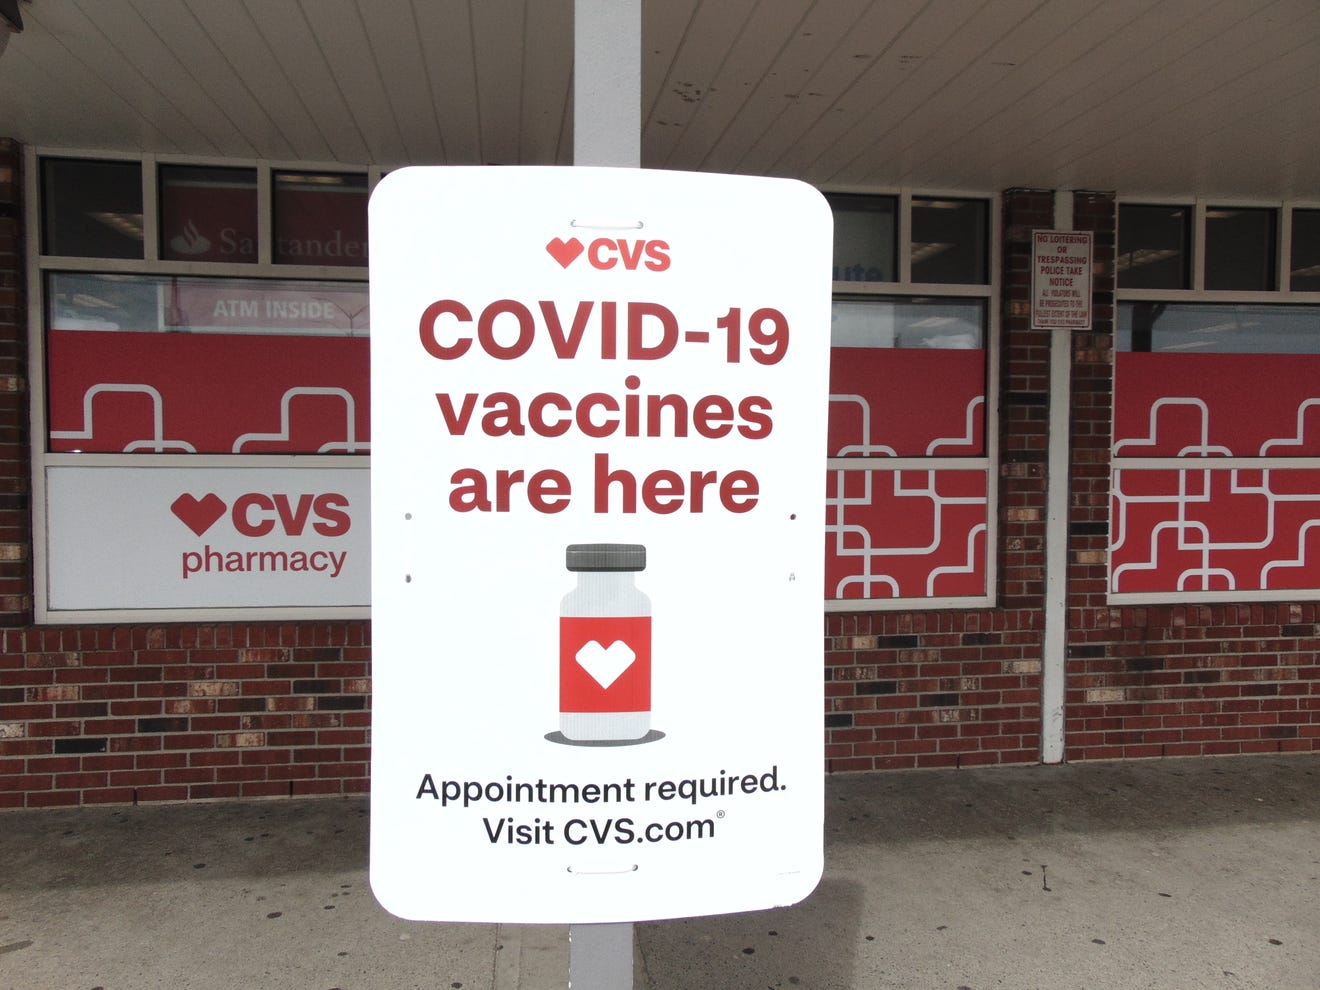 Newsom: mask mandate ends June 15, and CVS offers vaccinations to teens